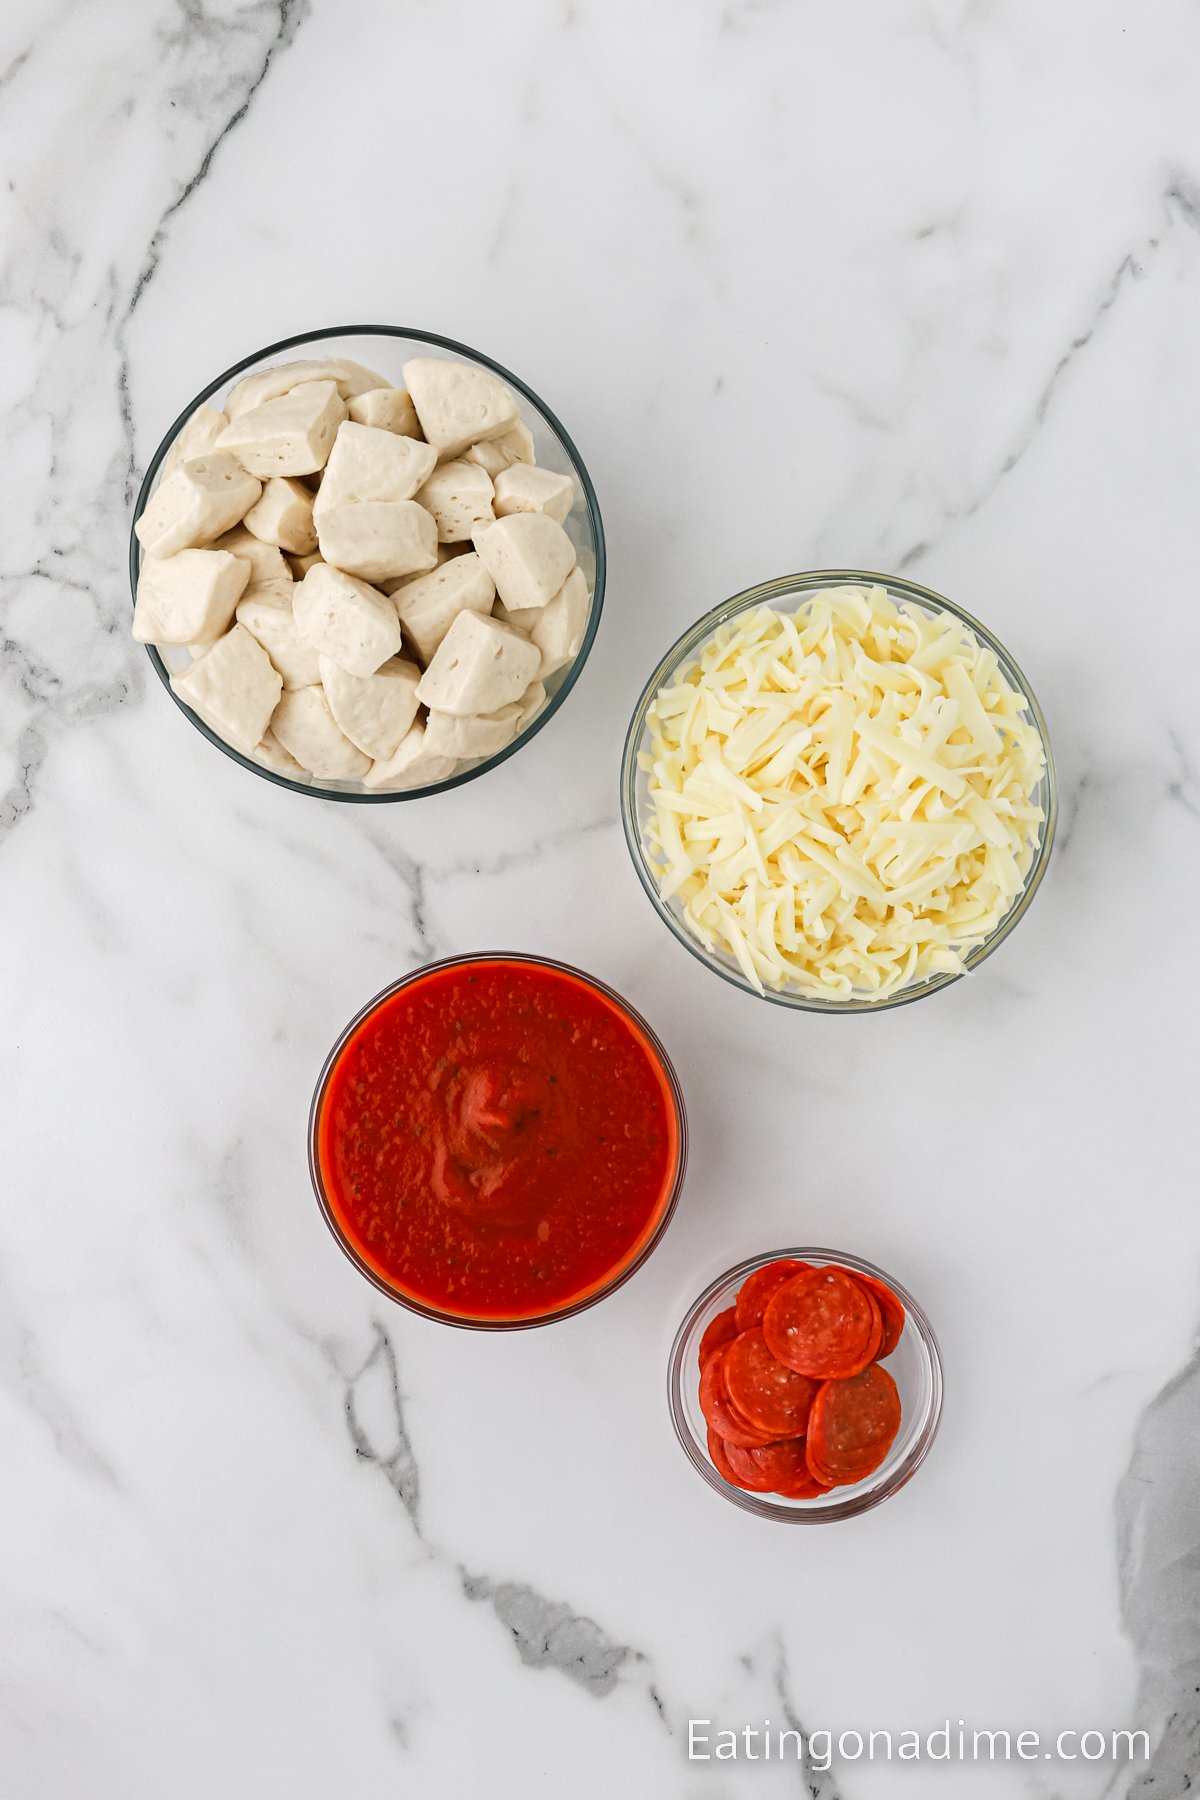 Ingredients needed - canned biscuits, pizza sauce, mozzarella cheese, pepperoni